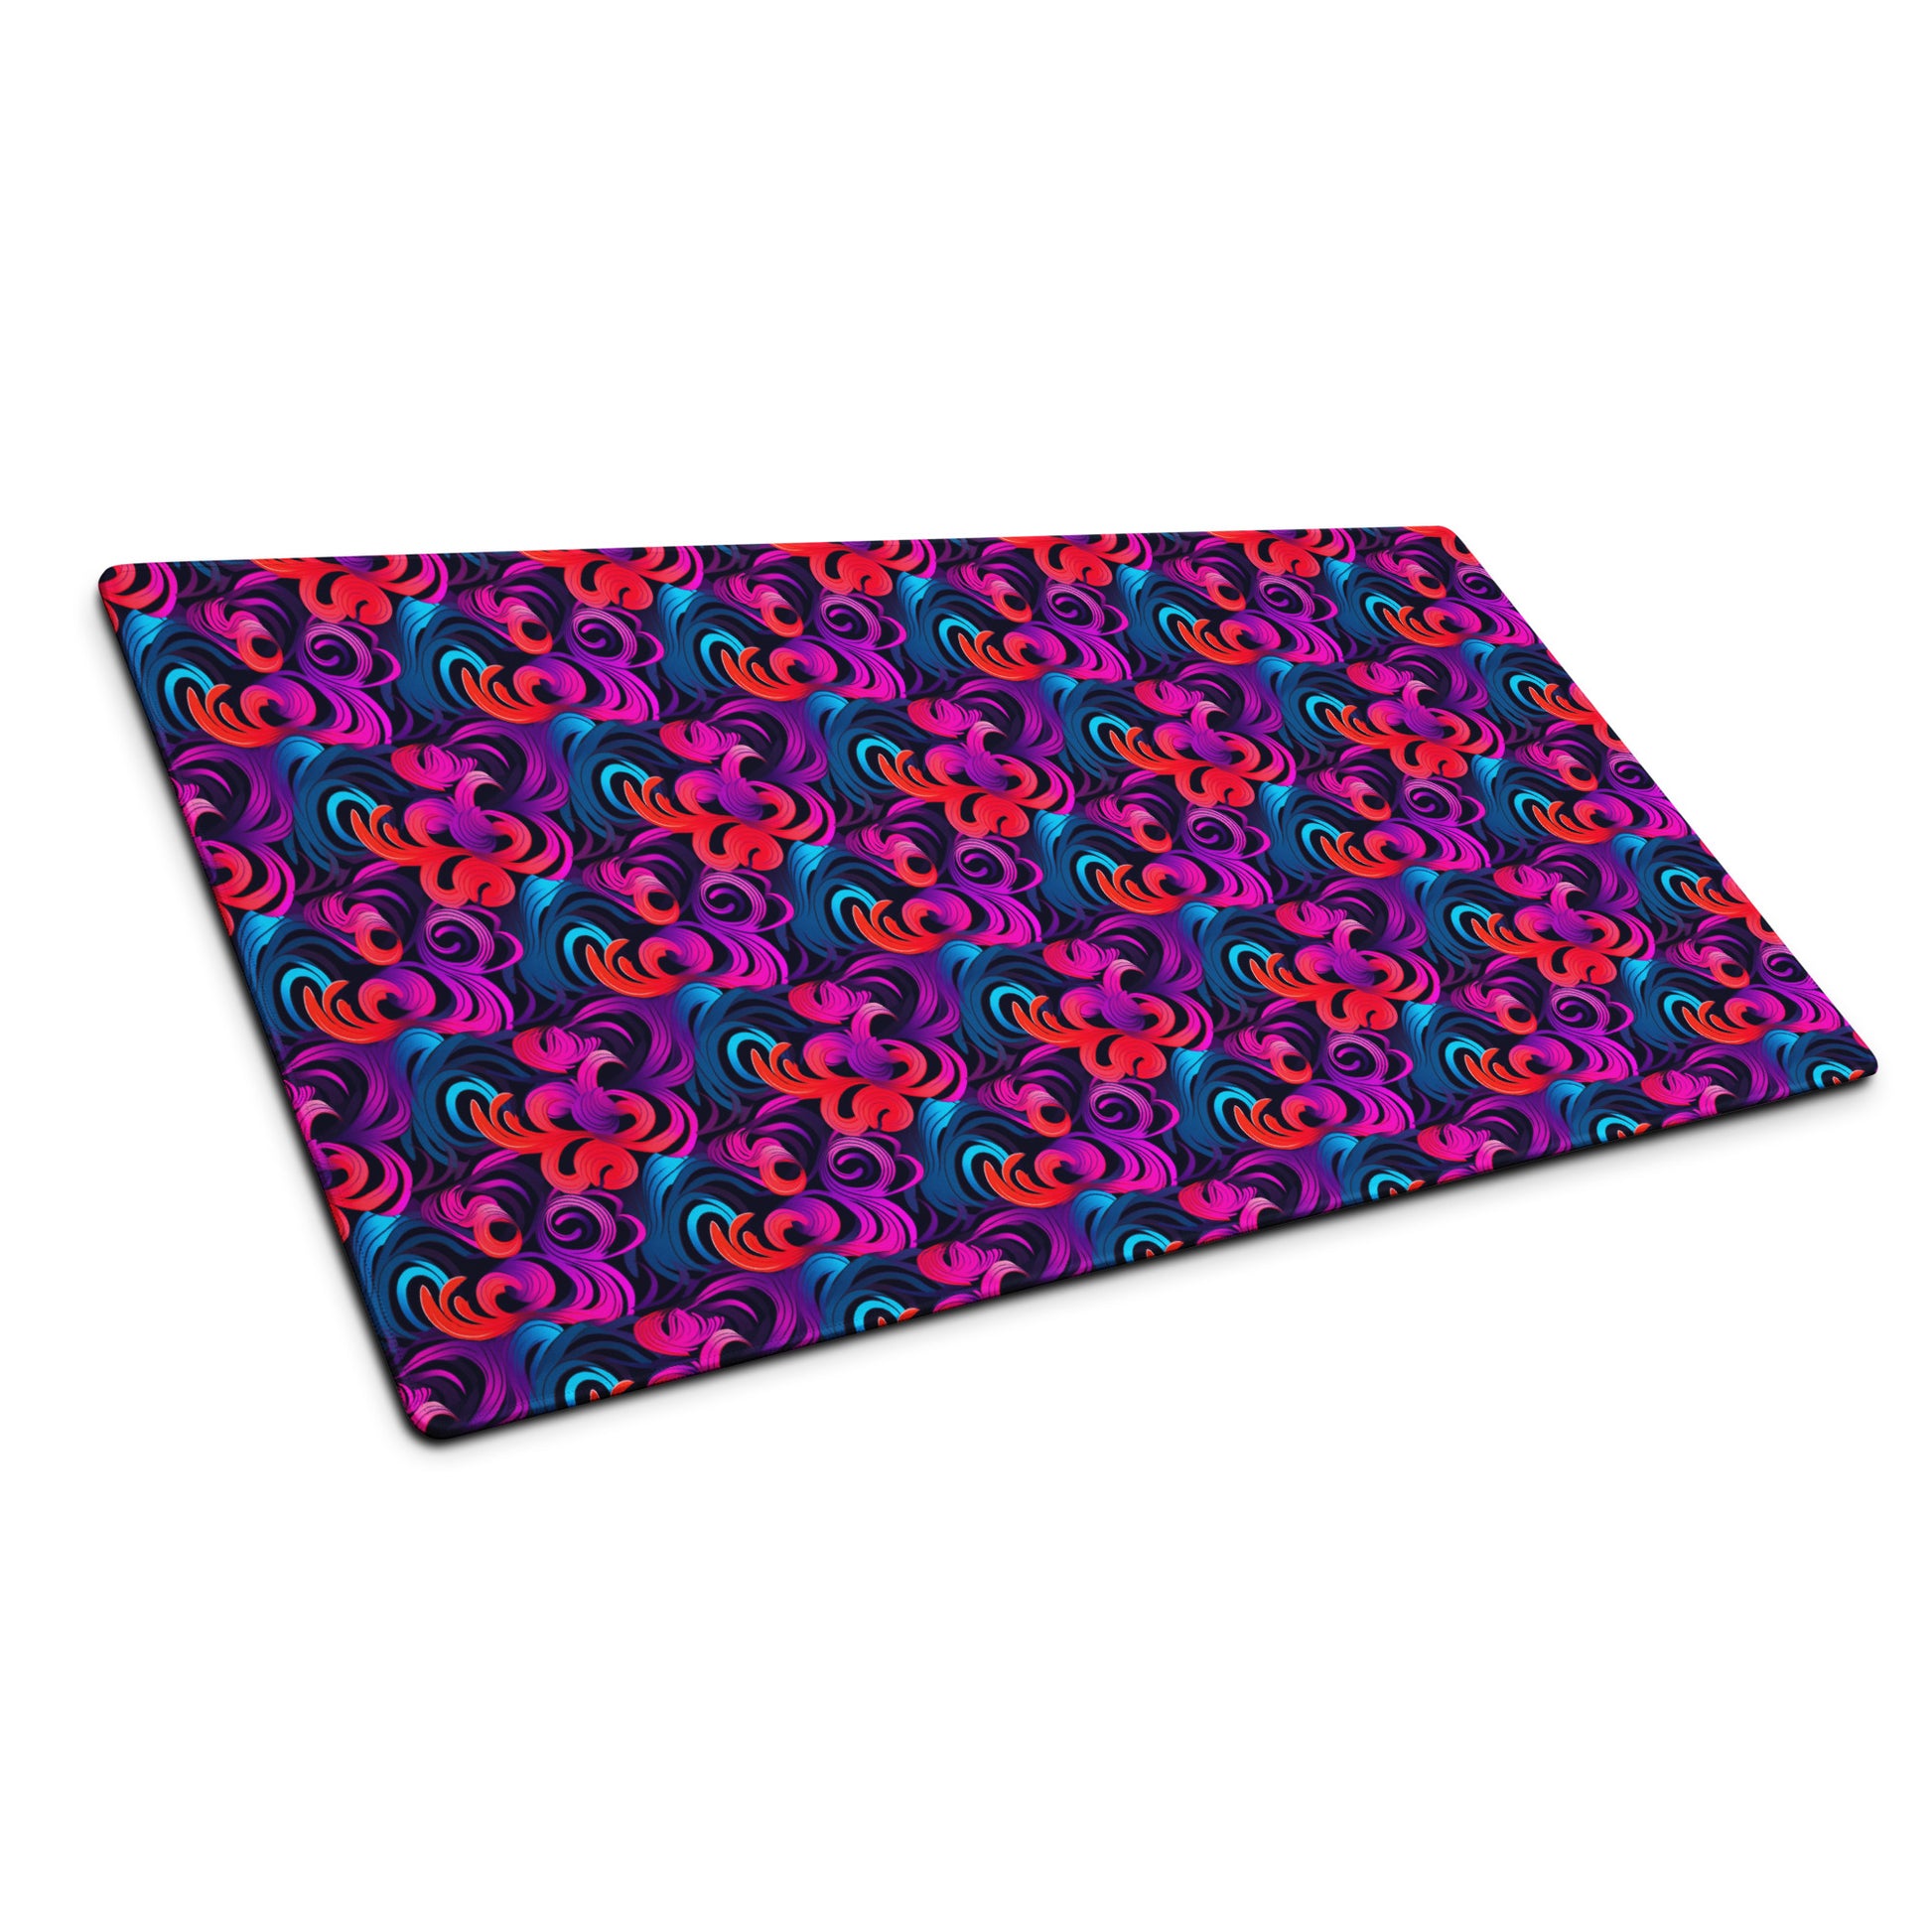 A 36" x 18" desk pad with a bright floral pattern all over it shown at an angle. Blue, Purple and Red in color.